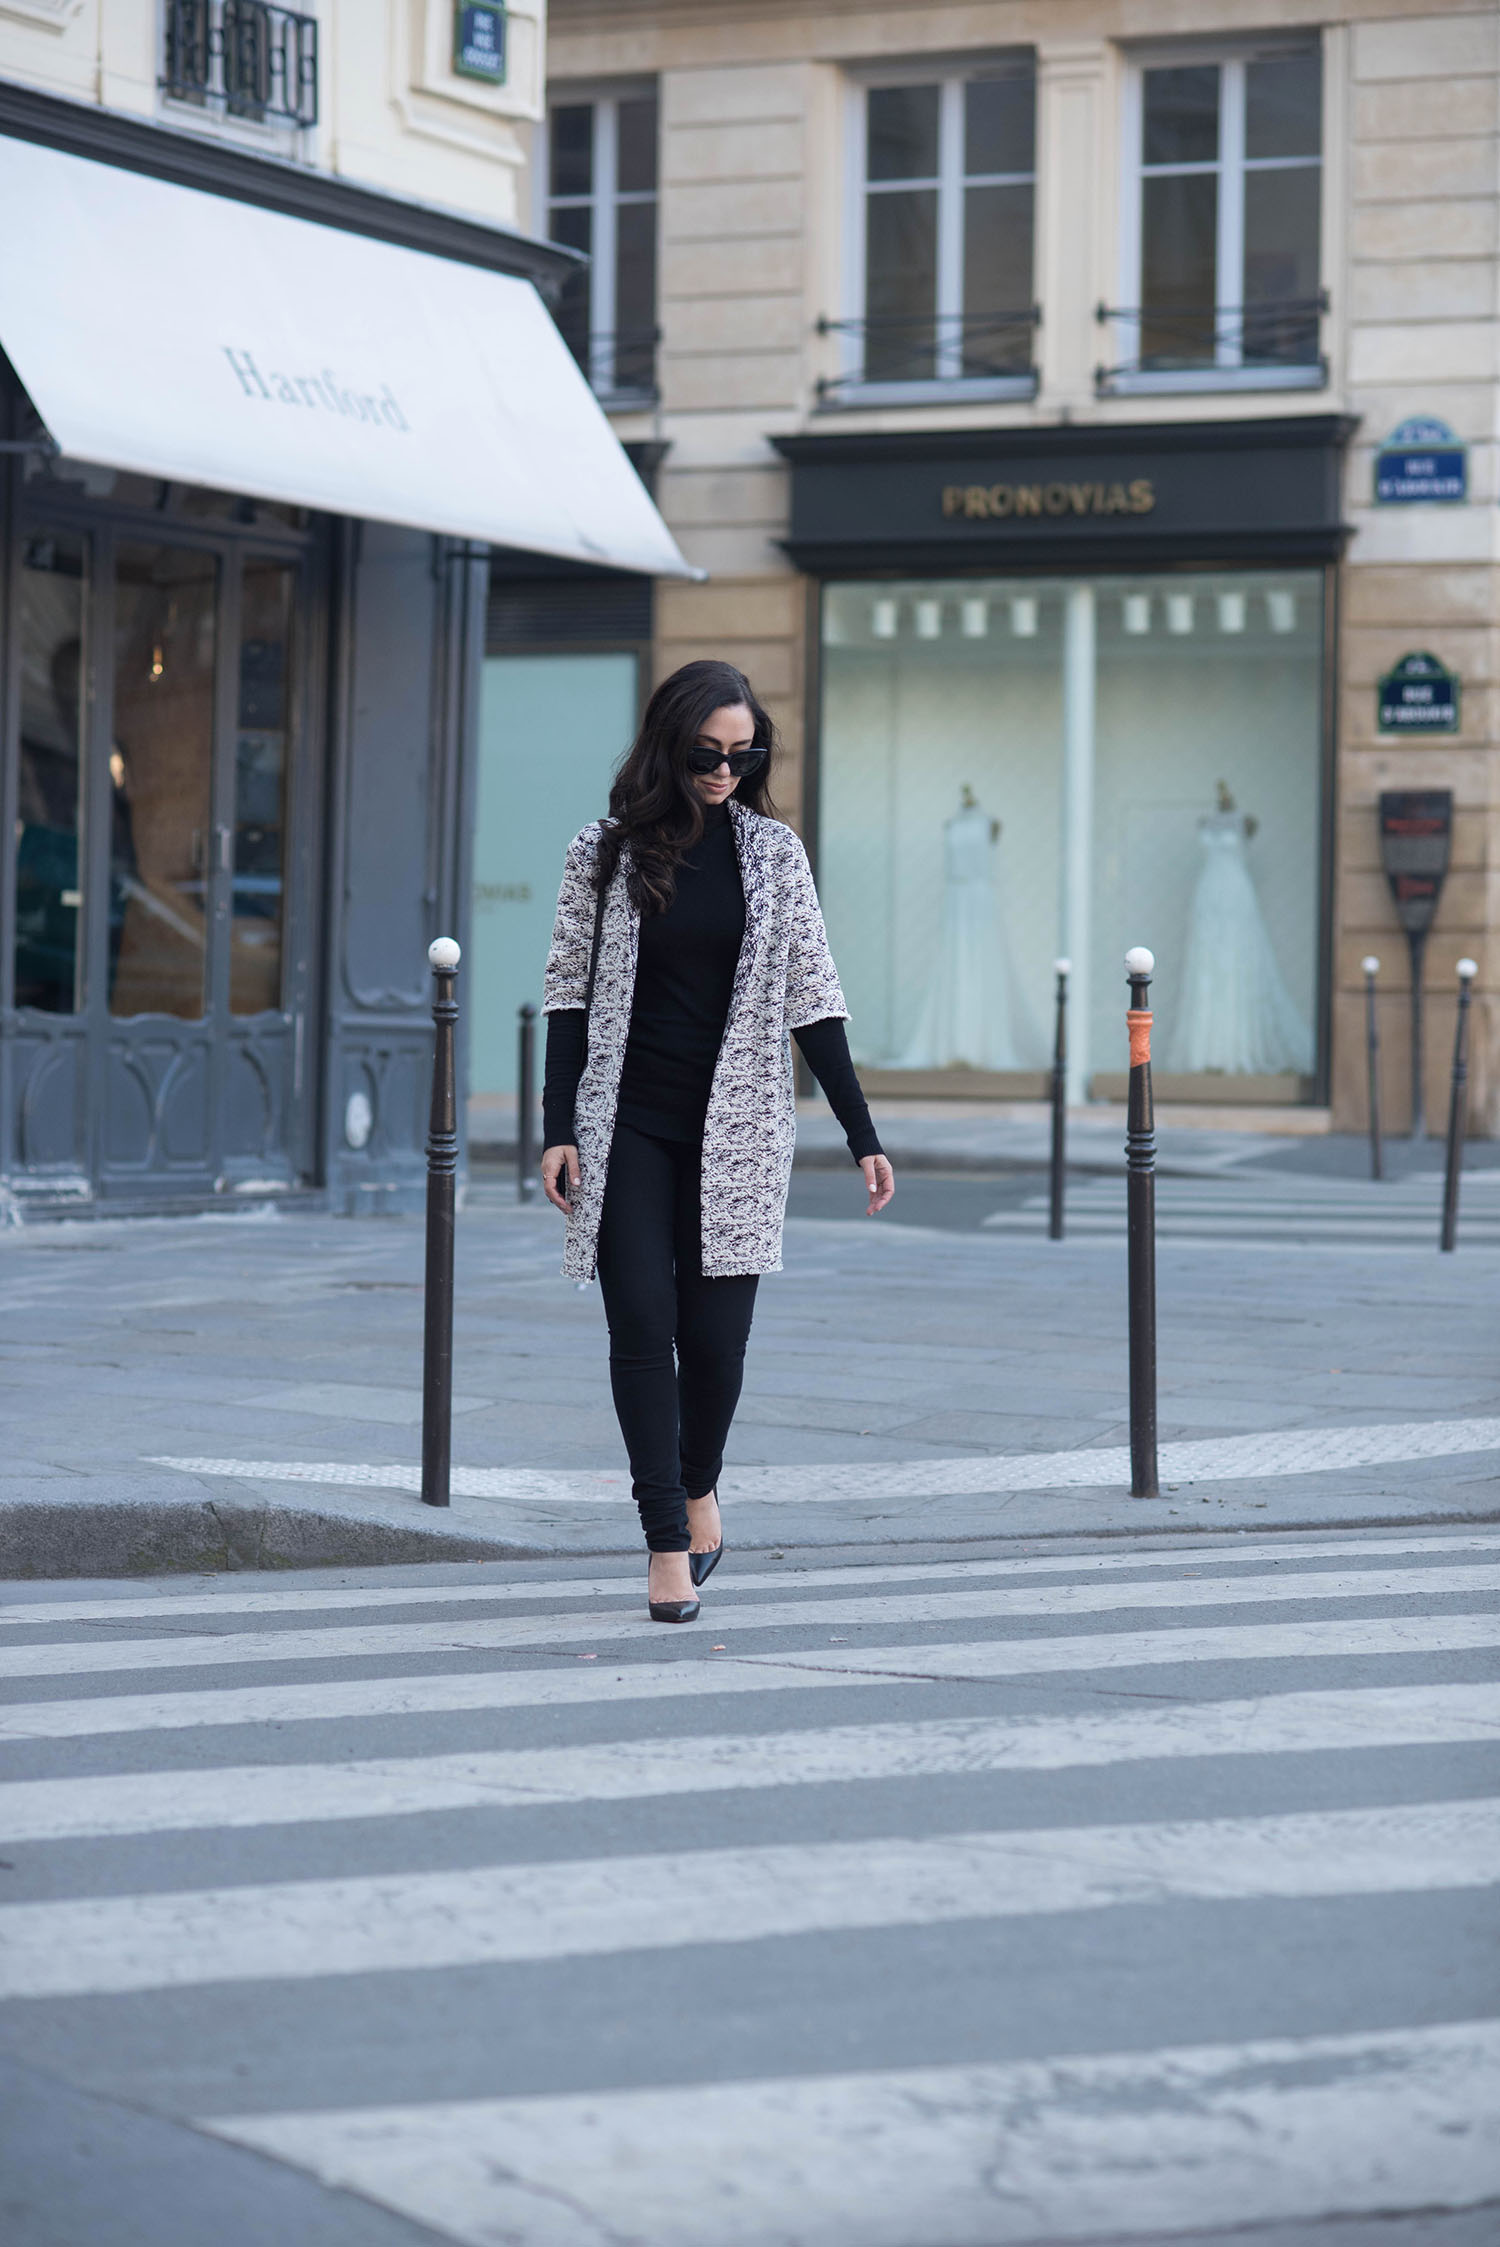 Fashion blogger Cee Fardoe of Coco & Vera wearing a Floriane Fosso coat and Christian Louboutin Pigalle pumps in Paris